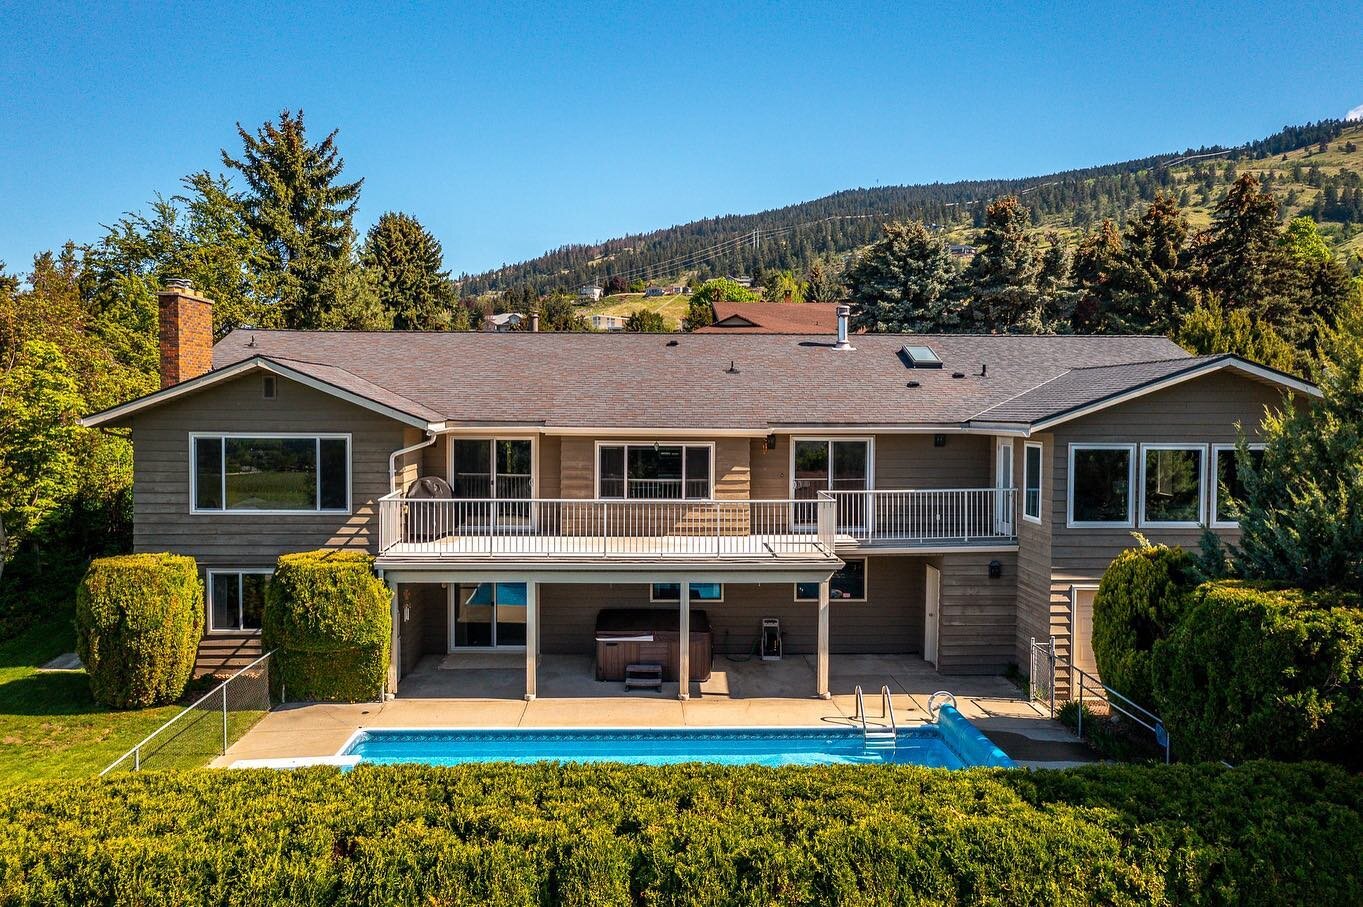 An absolutely beautifully situated home.  Scroll through and check out some of the gorgeous arial shots. It&rsquo;s time for the sunny Okanagan to shine! 

Coming soon! @remaxpriscilla 

-
-
-
#pools
#homeswithpools 
#okanaganrealestate 
#okanaganval